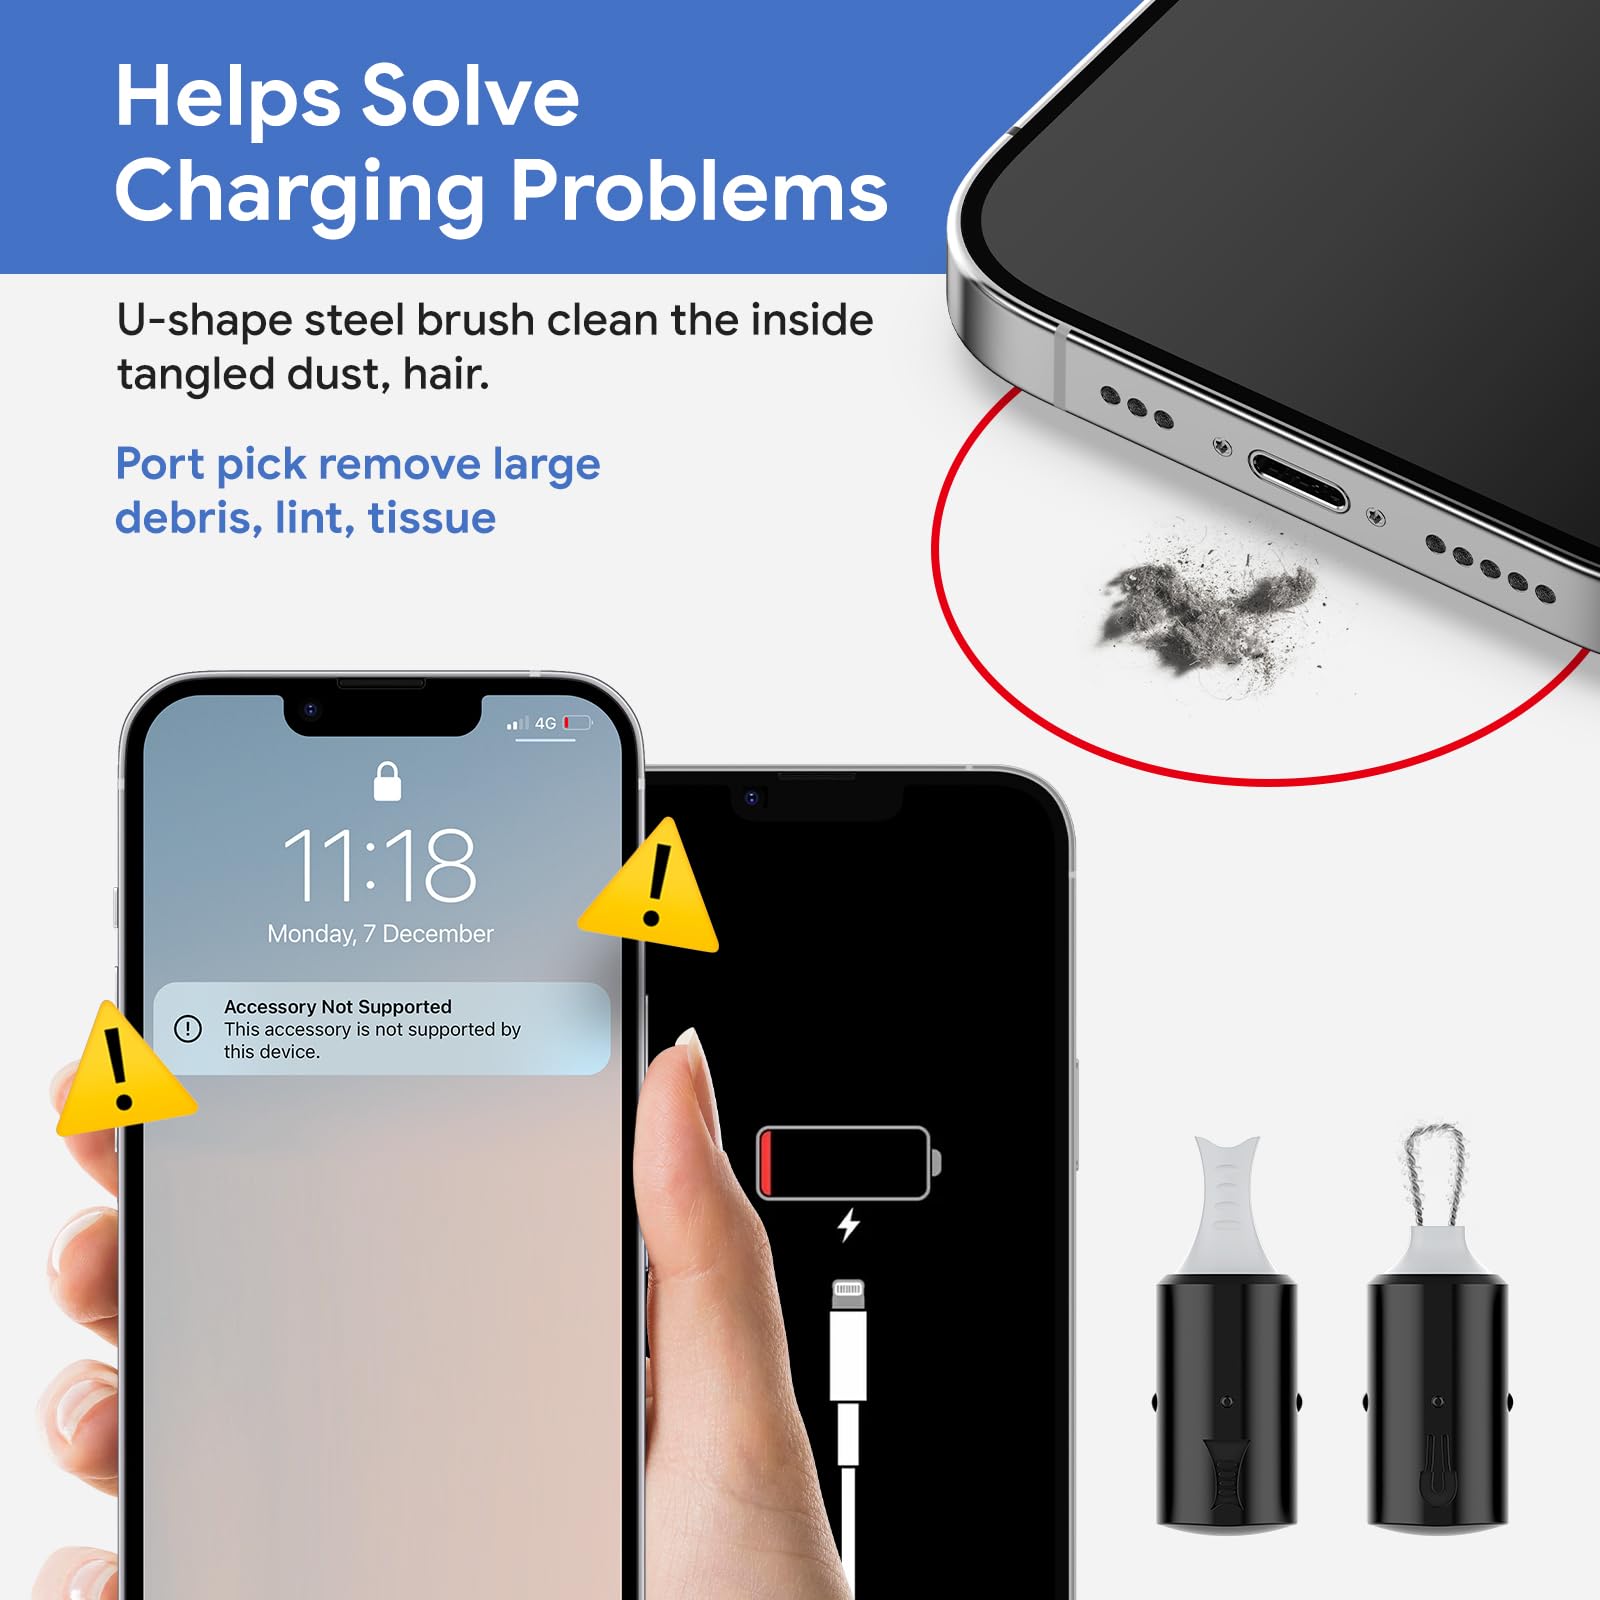 12 in 1 iPhone Cleaning Kit,Phone Cleaning Kit for iPhone/Airpod/iPad/Charge Port Cleaning Tool,Safely Clean Lightning Cable and Connector to Fix Unreliable Charging,Easy to Store and Carry, Black